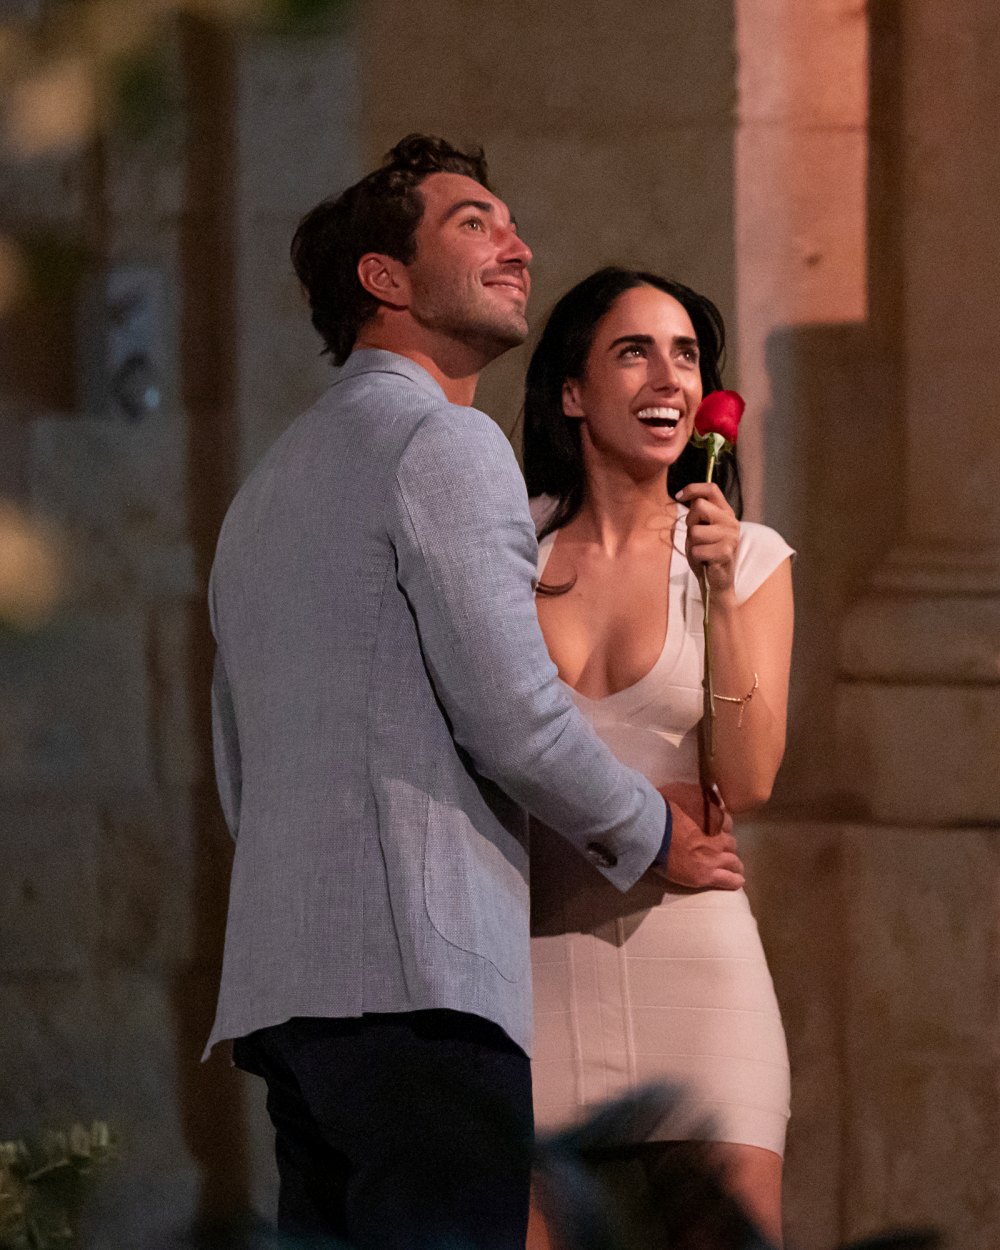 Maria Georgas Reveals Why She Backed Out of ‘The Bachelorette’: ‘Not in the Right Headspace’